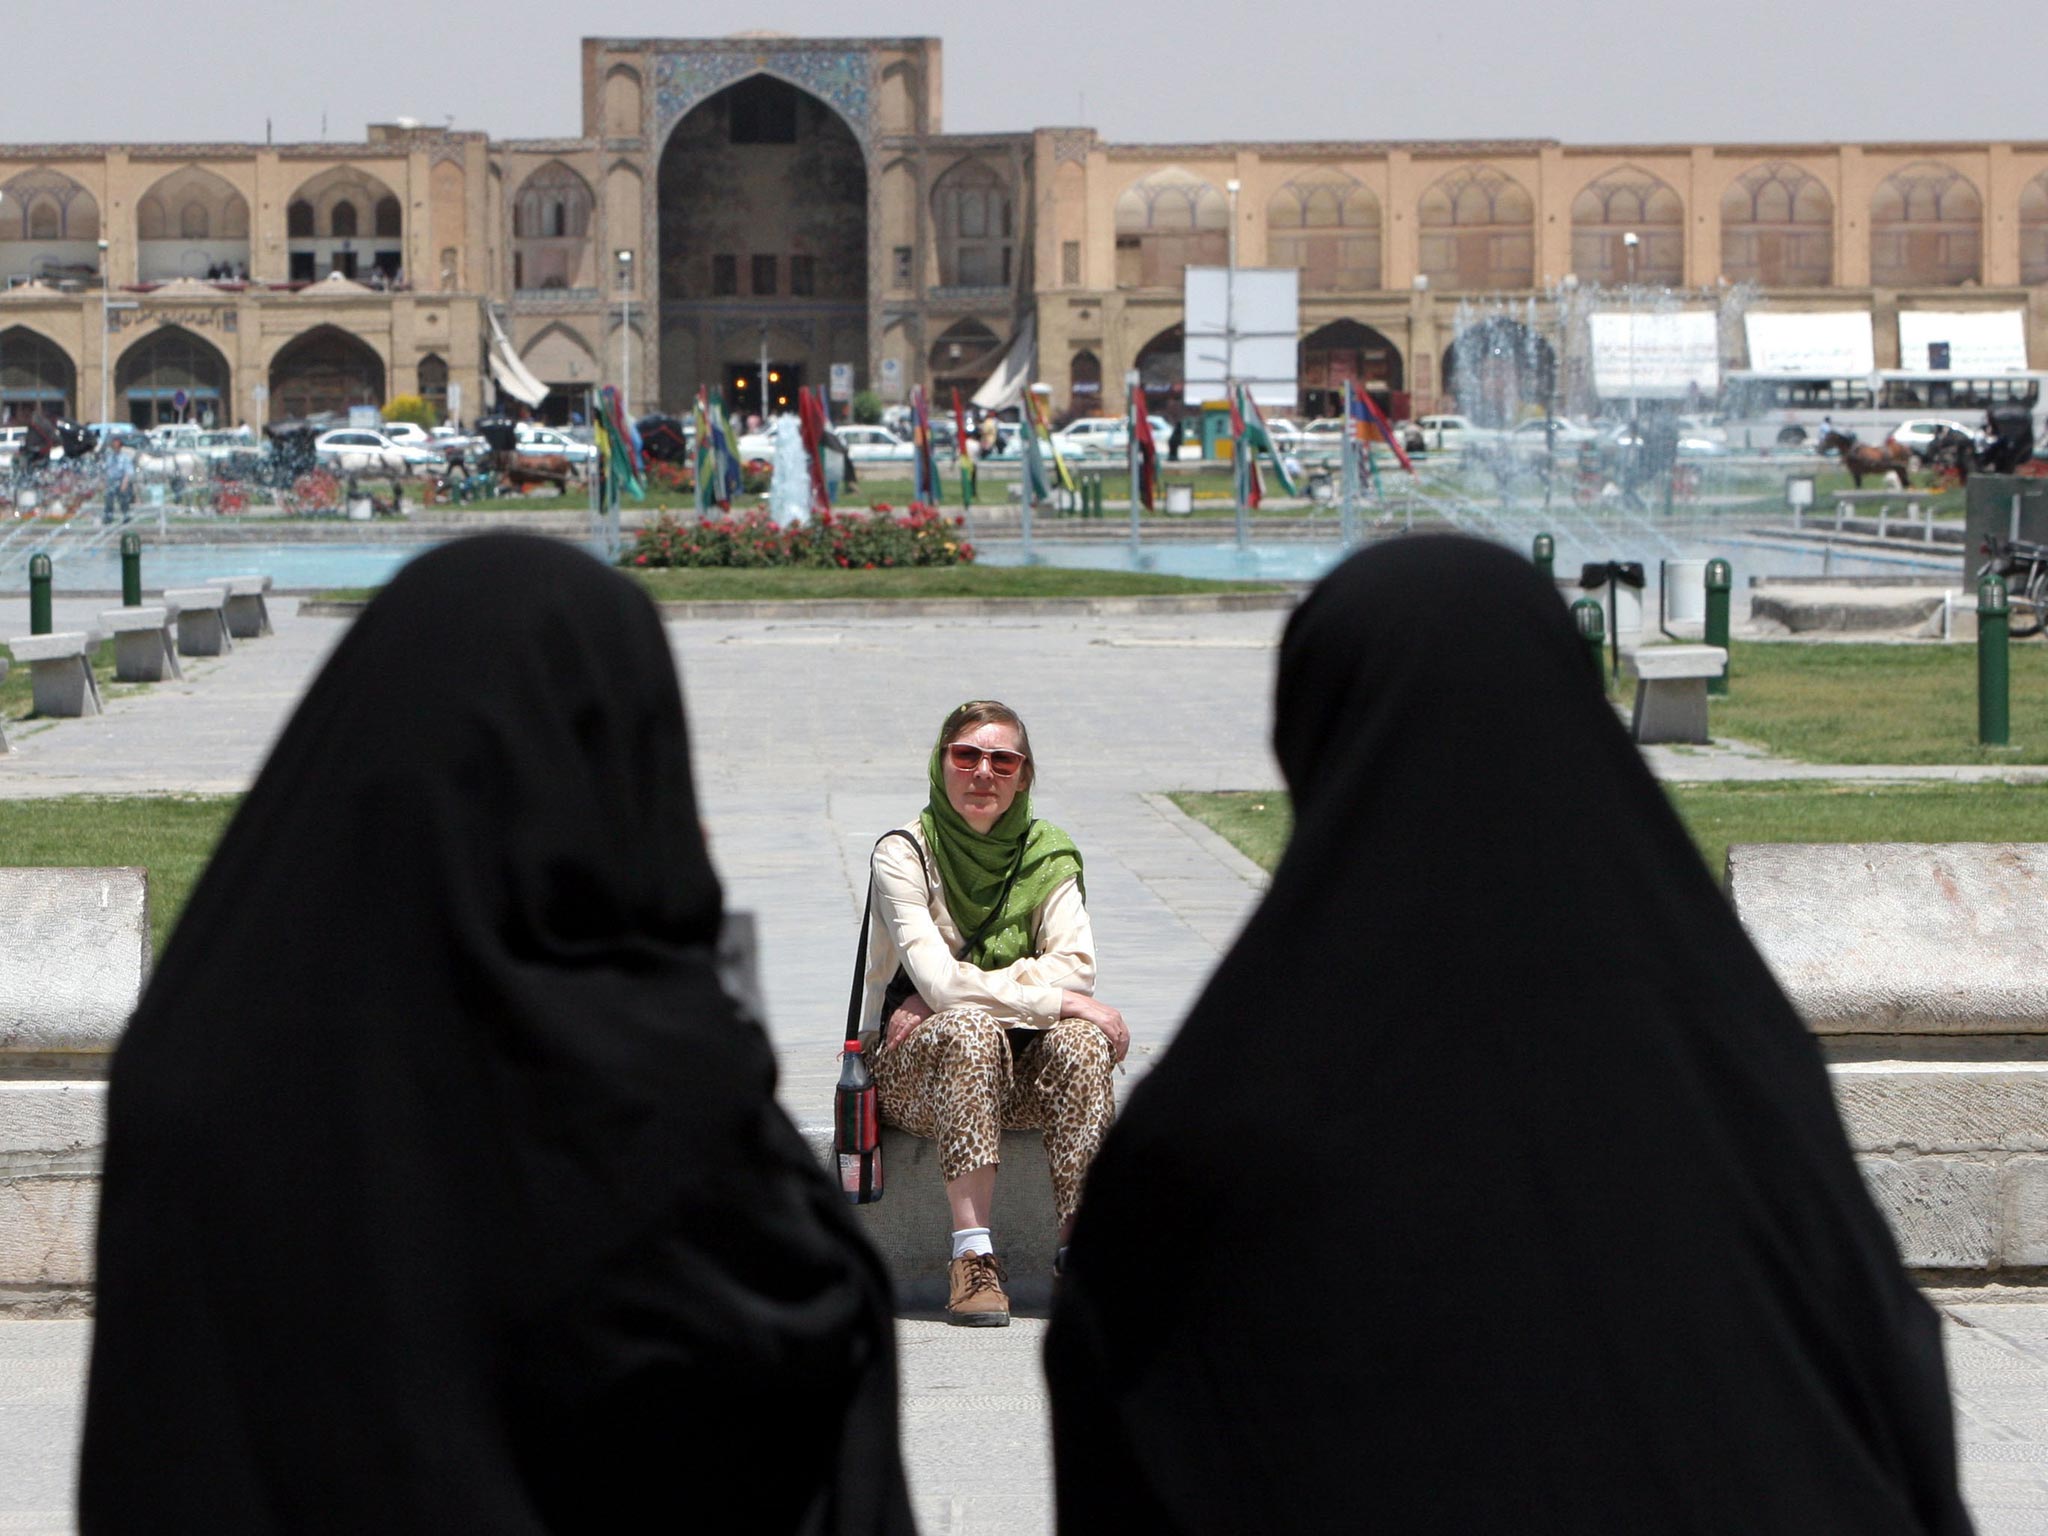 A tourist in Isfahan, some 400km south of the Iranian
capital, Tehran.